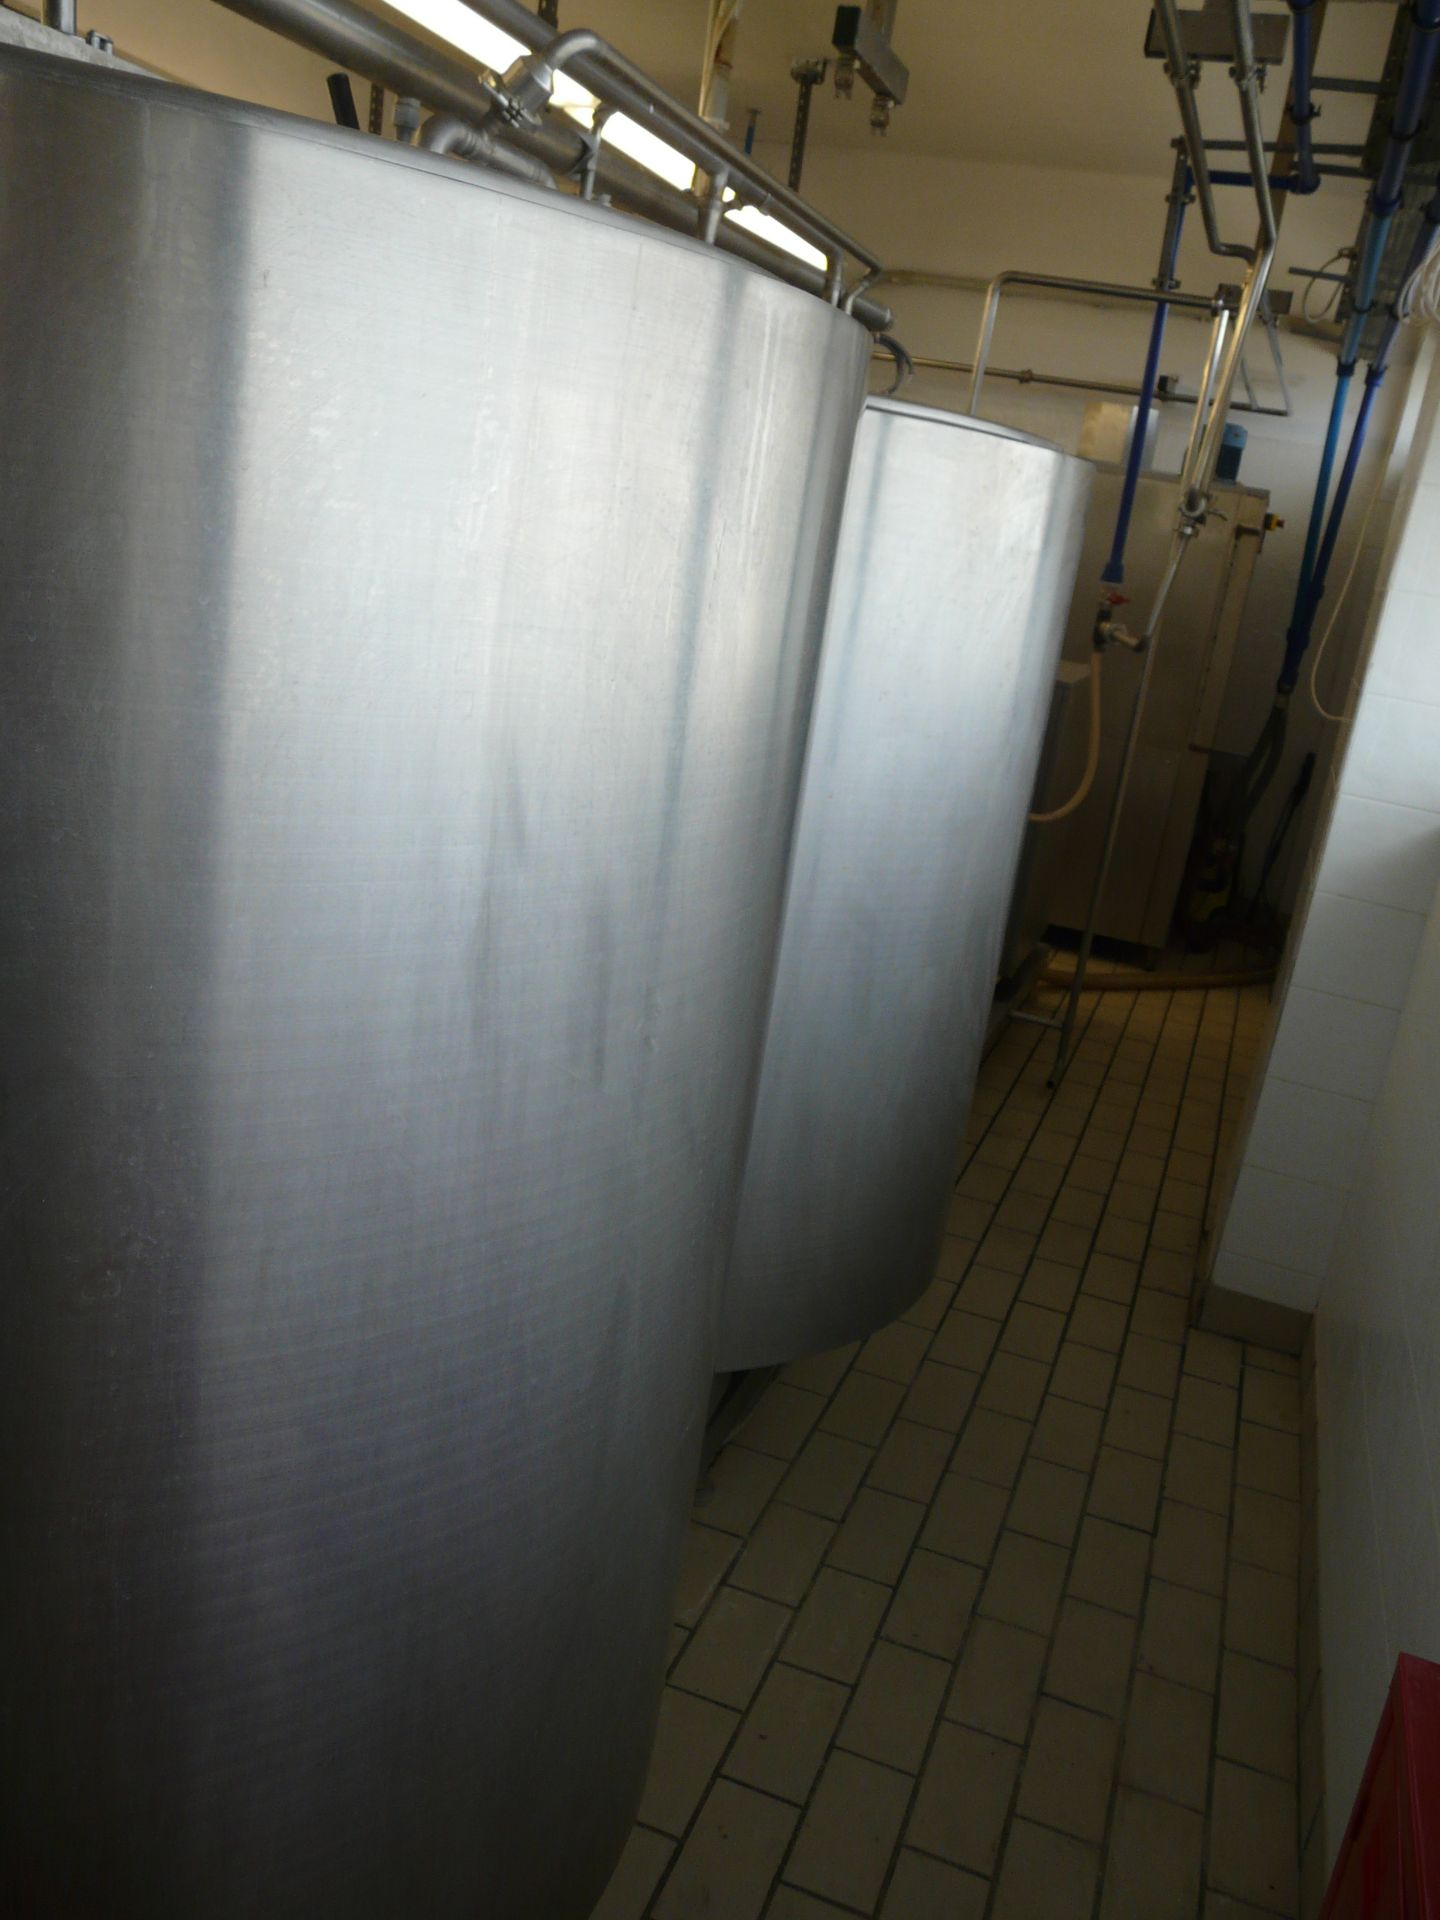 English: TETRA PAK HOYER HTST SYSTEM, 1200 Pasteurizer for Ice Cream, Contains 2 x Tanks with - Image 31 of 45